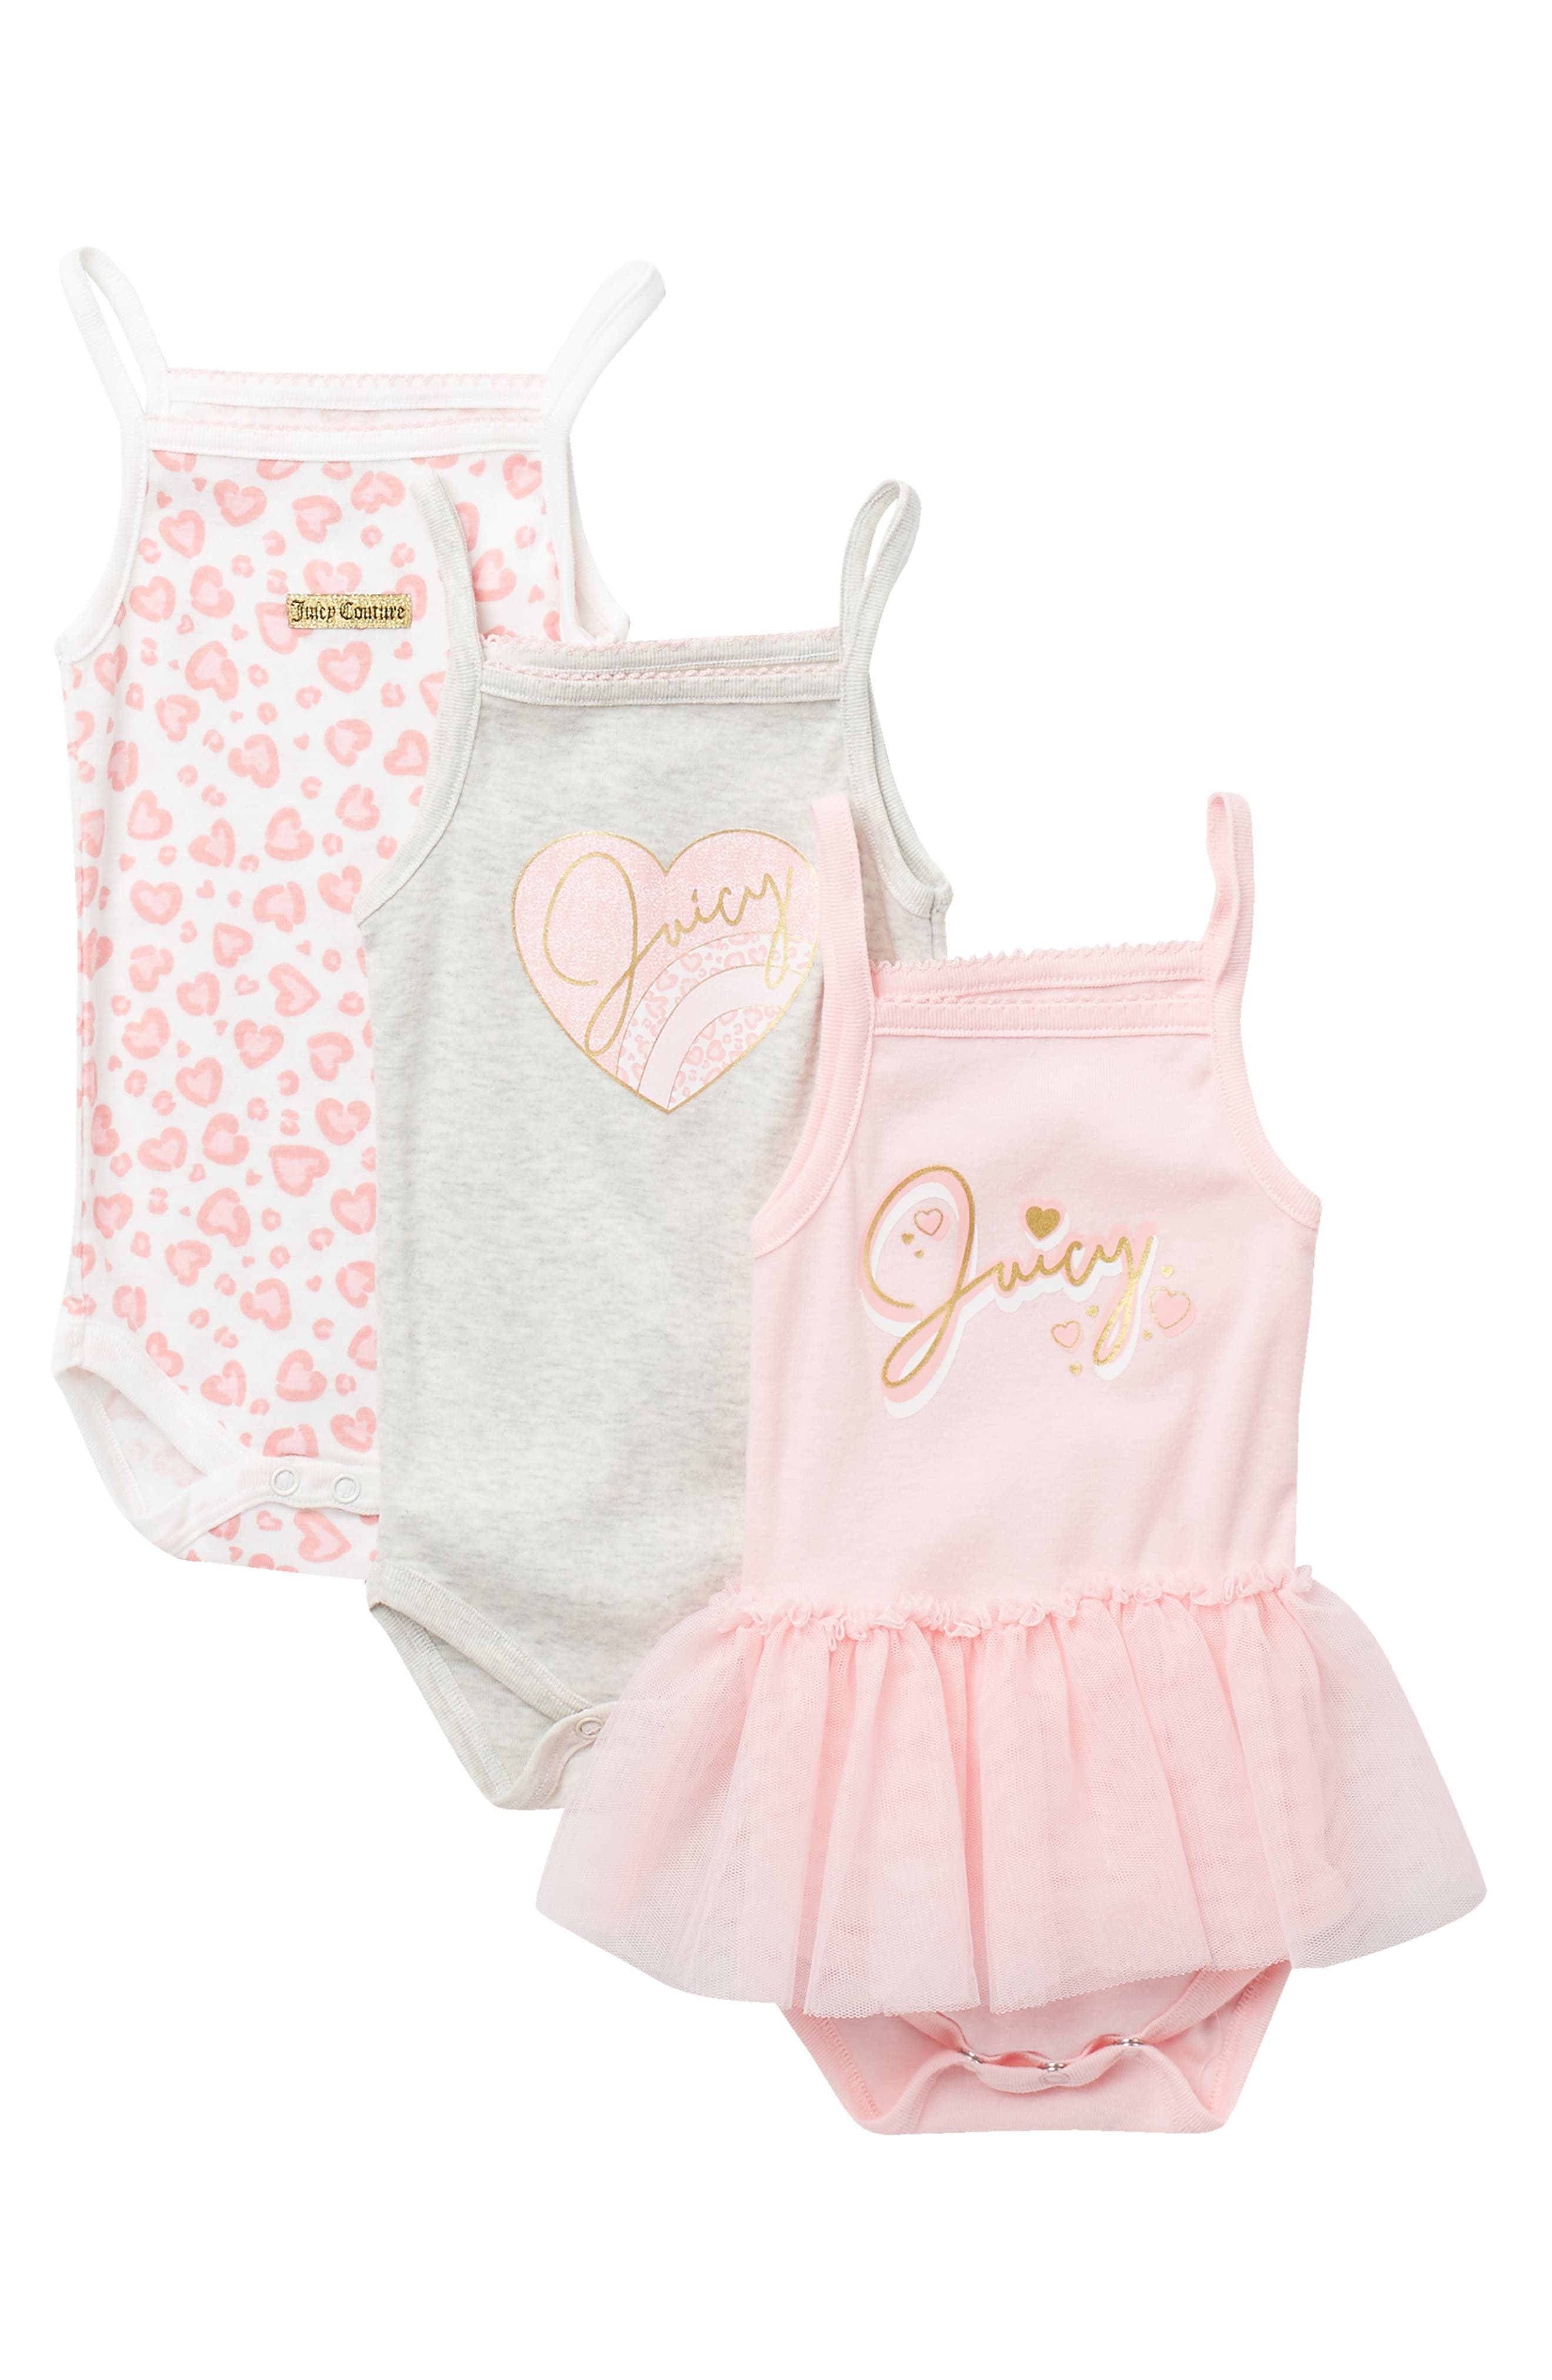 Juicy Couture Bodysuits In Assorted